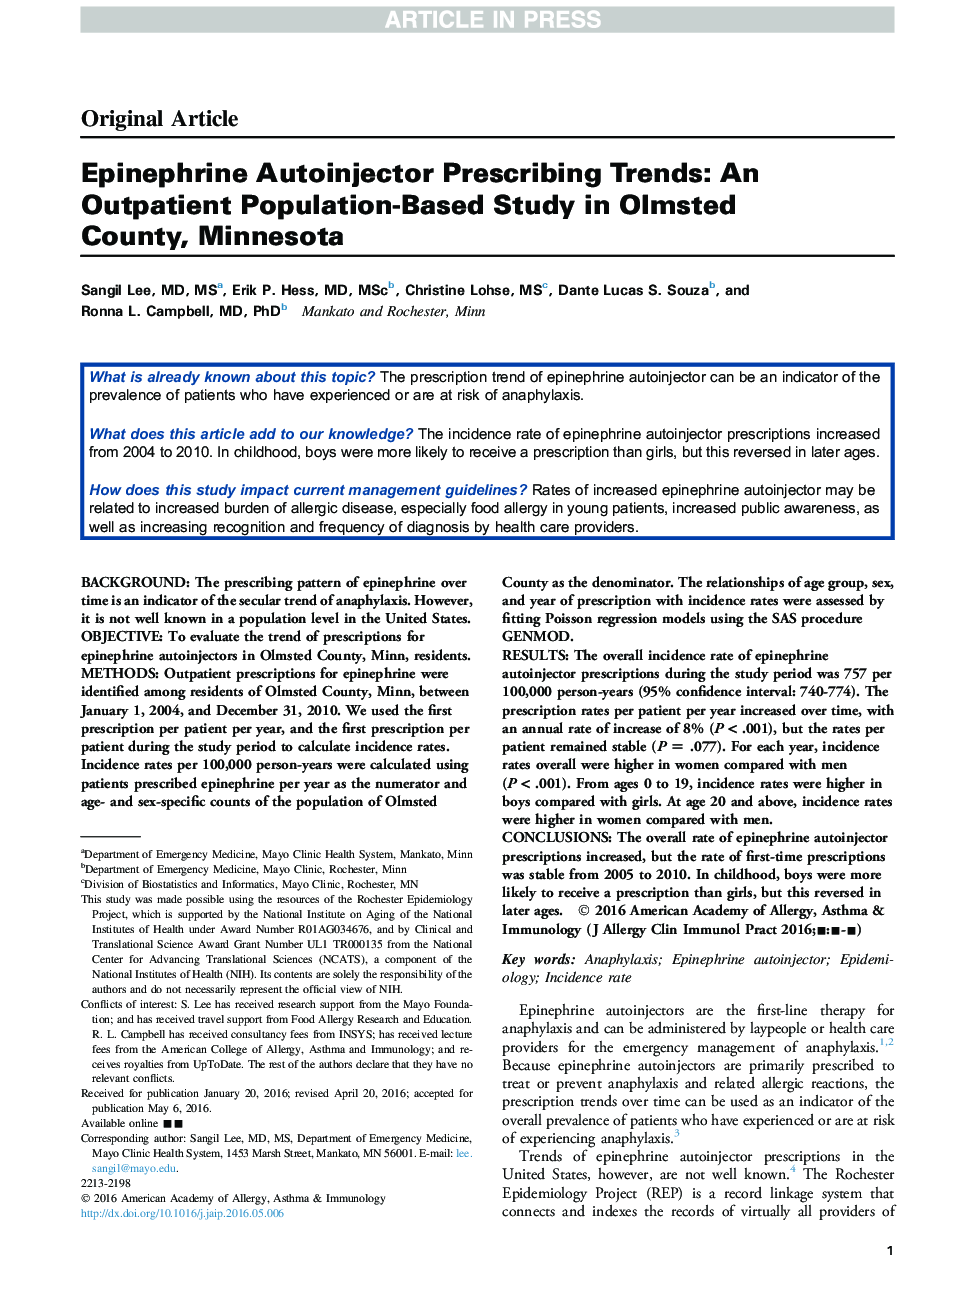 Epinephrine Autoinjector Prescribing Trends: An Outpatient Population-Based Study in Olmsted County, Minnesota